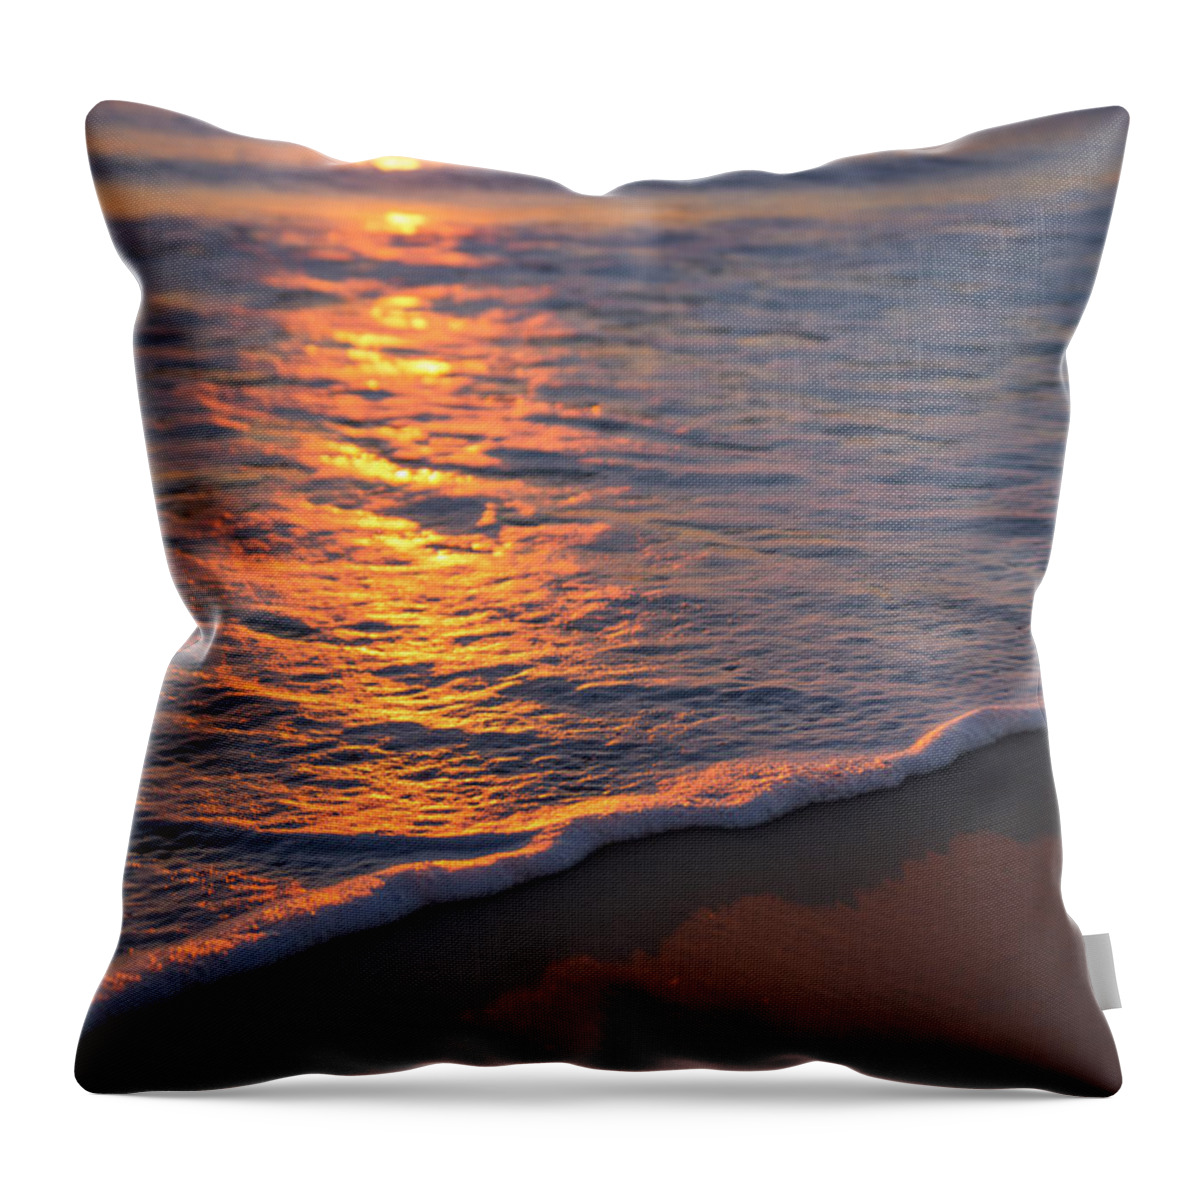 Nags Head Fishing Pier Throw Pillow featuring the photograph Nags Head First Light by Michael Ver Sprill